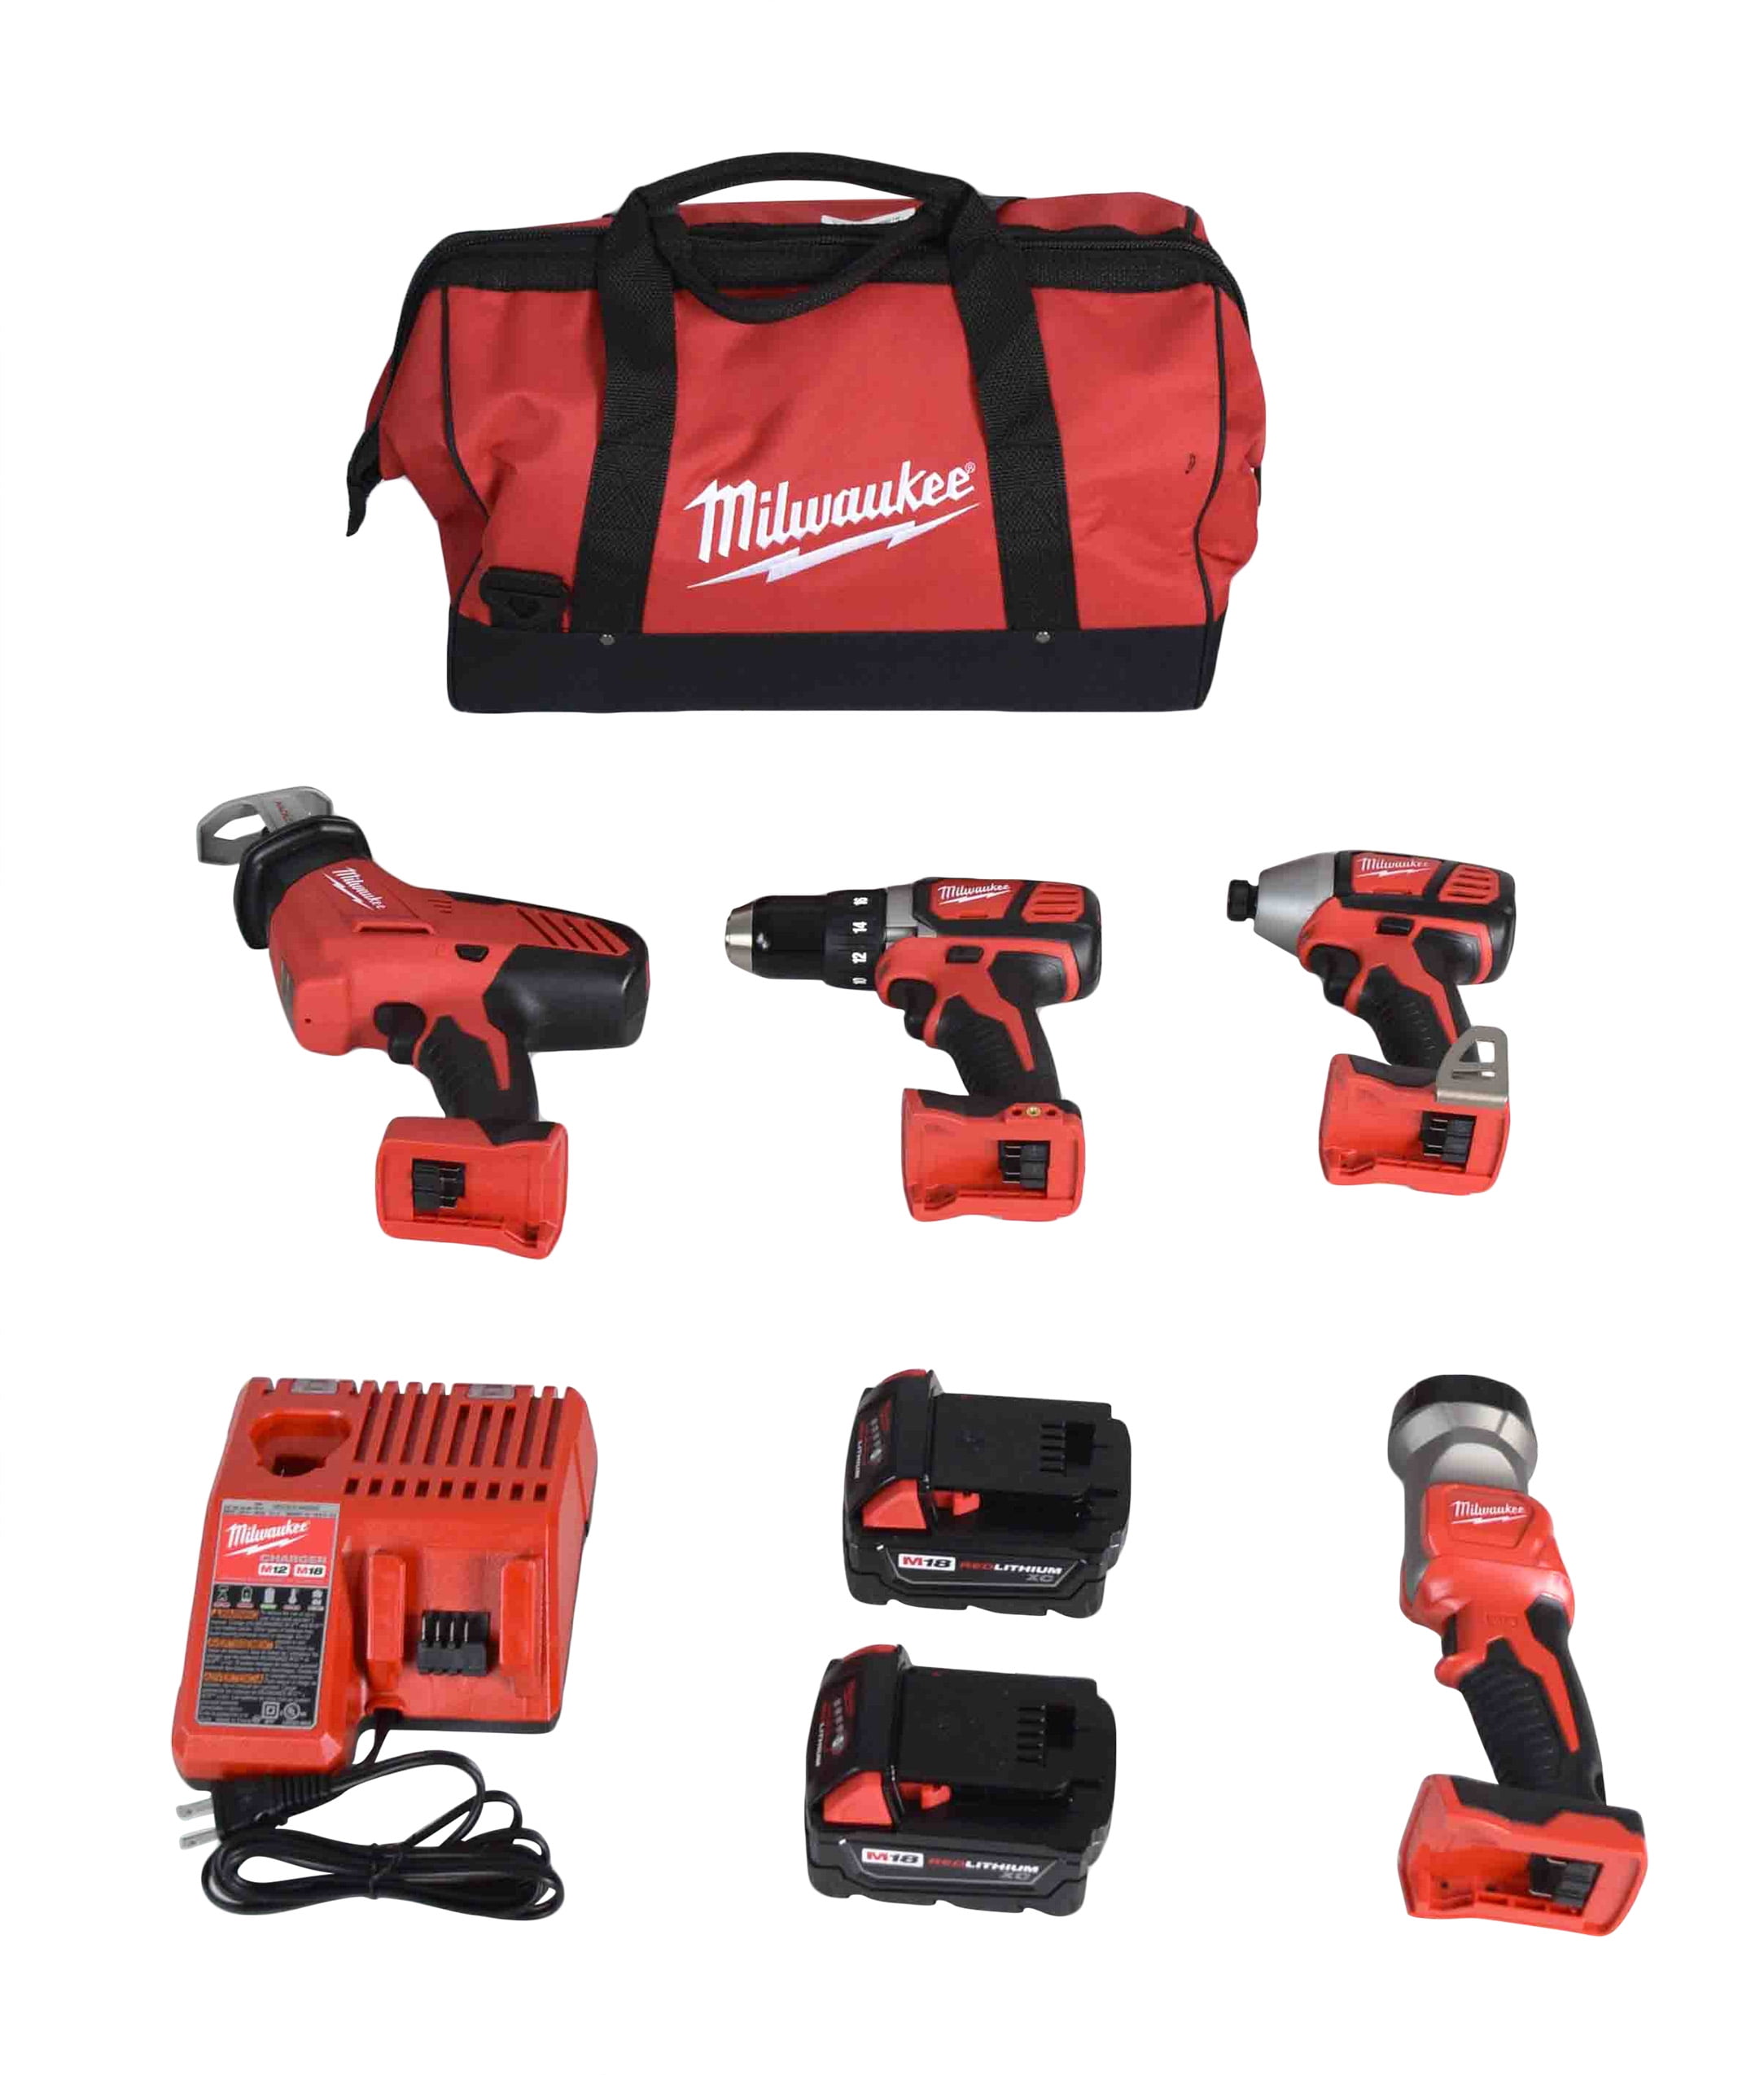 Milwaukee M18 Cordless 18V 4-Tool Kit (Drill/Driver, Hackzall, Impact  Driver, Light) 2695-24 with (2) 3Ah Batteries, Charger,  Tool Bag 